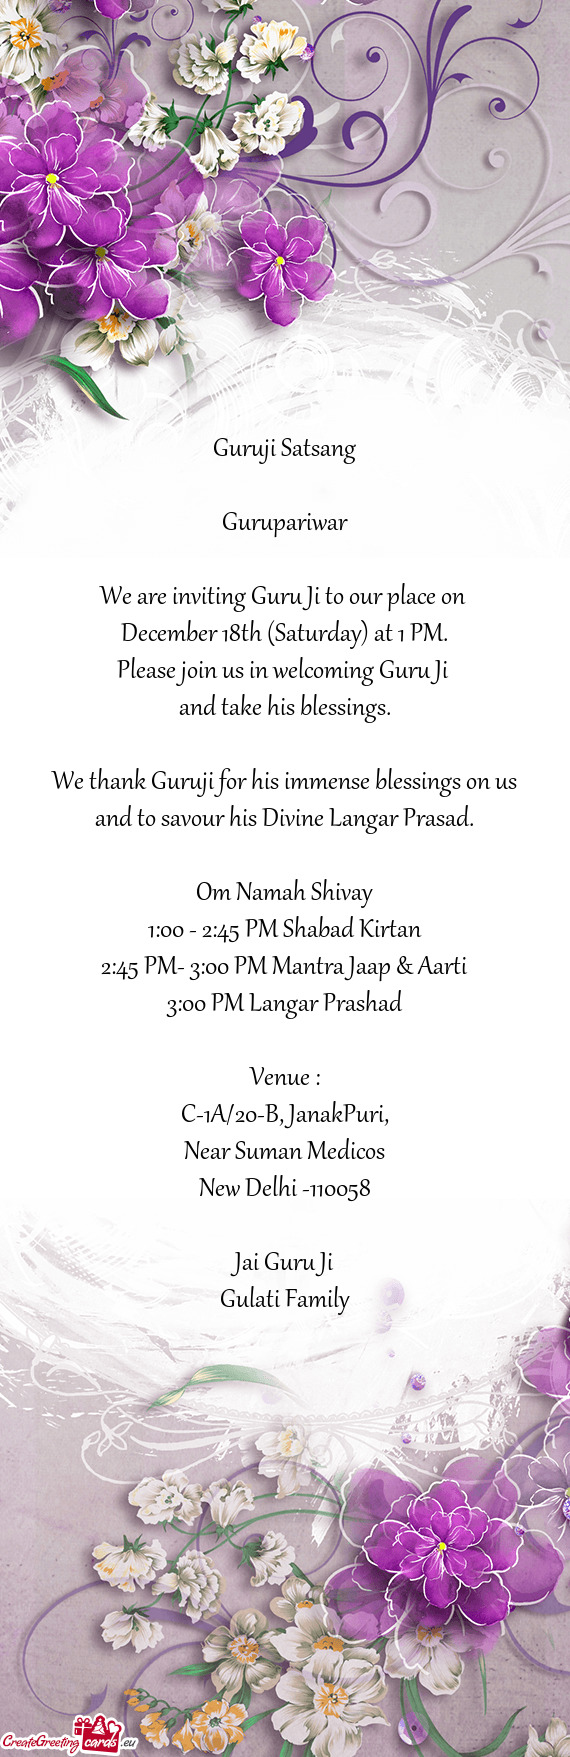 We are inviting Guru Ji to our place on